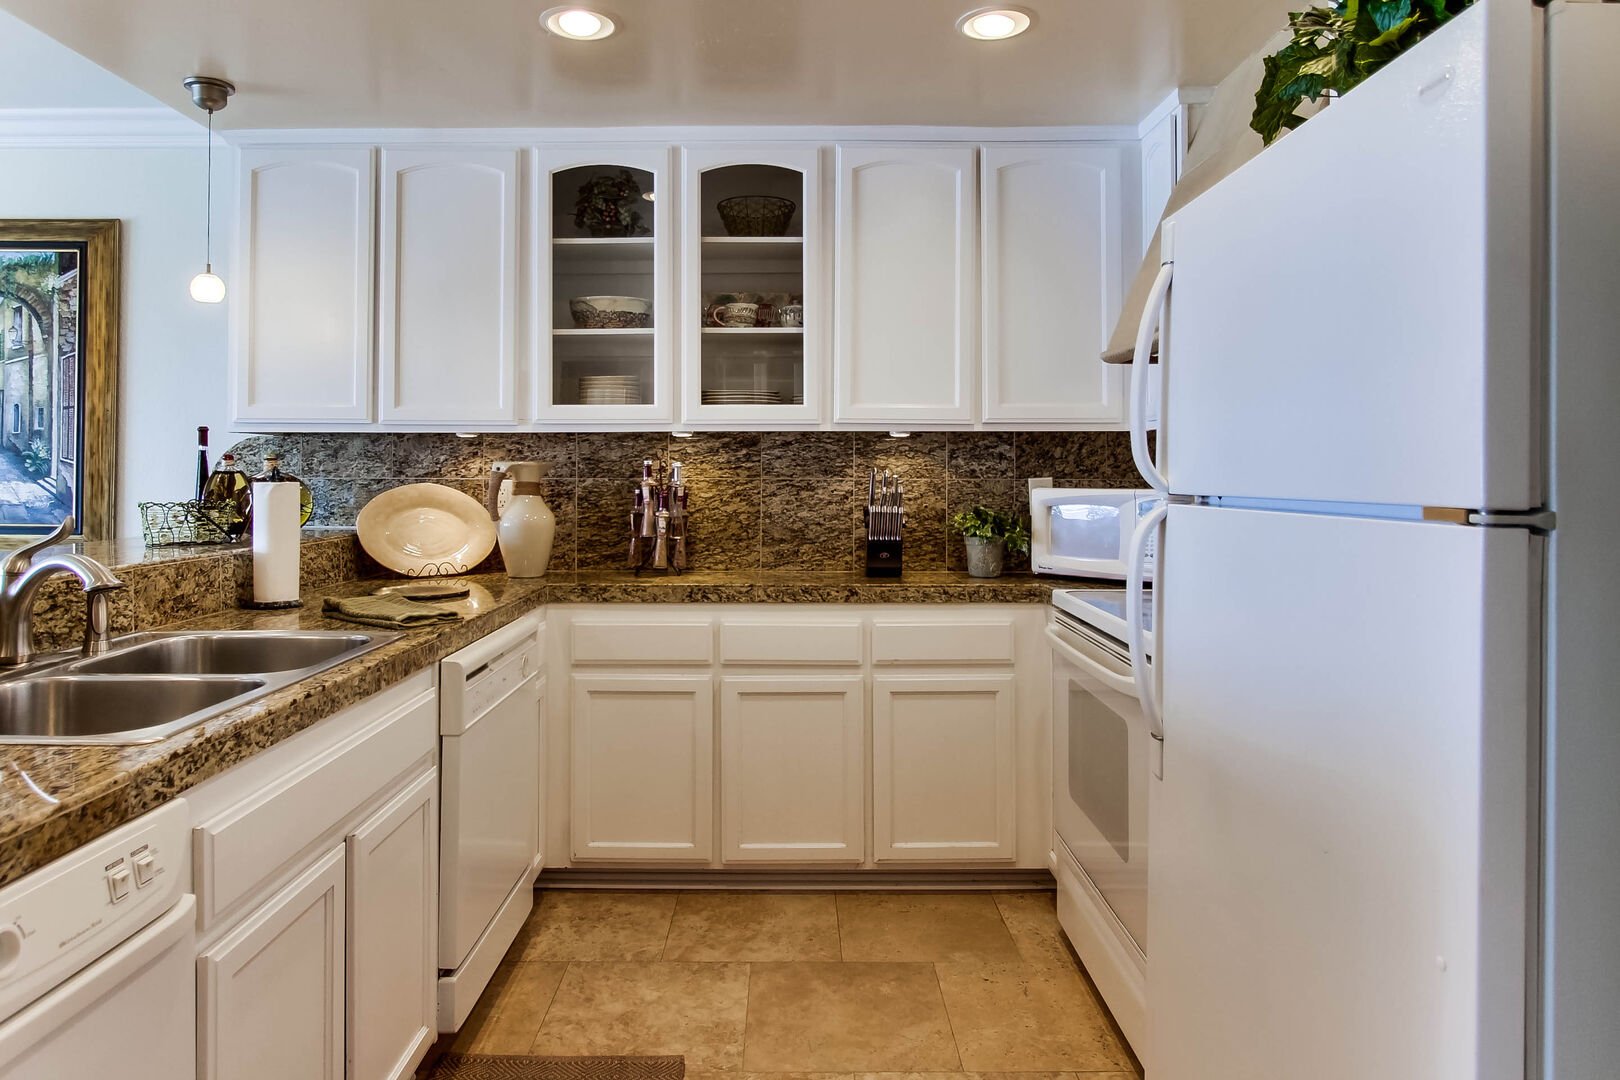 Kitchen with refrigerator, freezer, dishwasher, stove, oven, microwave, wine refrigerator, stainless steel appliances, quartz countertops and ample cabinet and drawer space